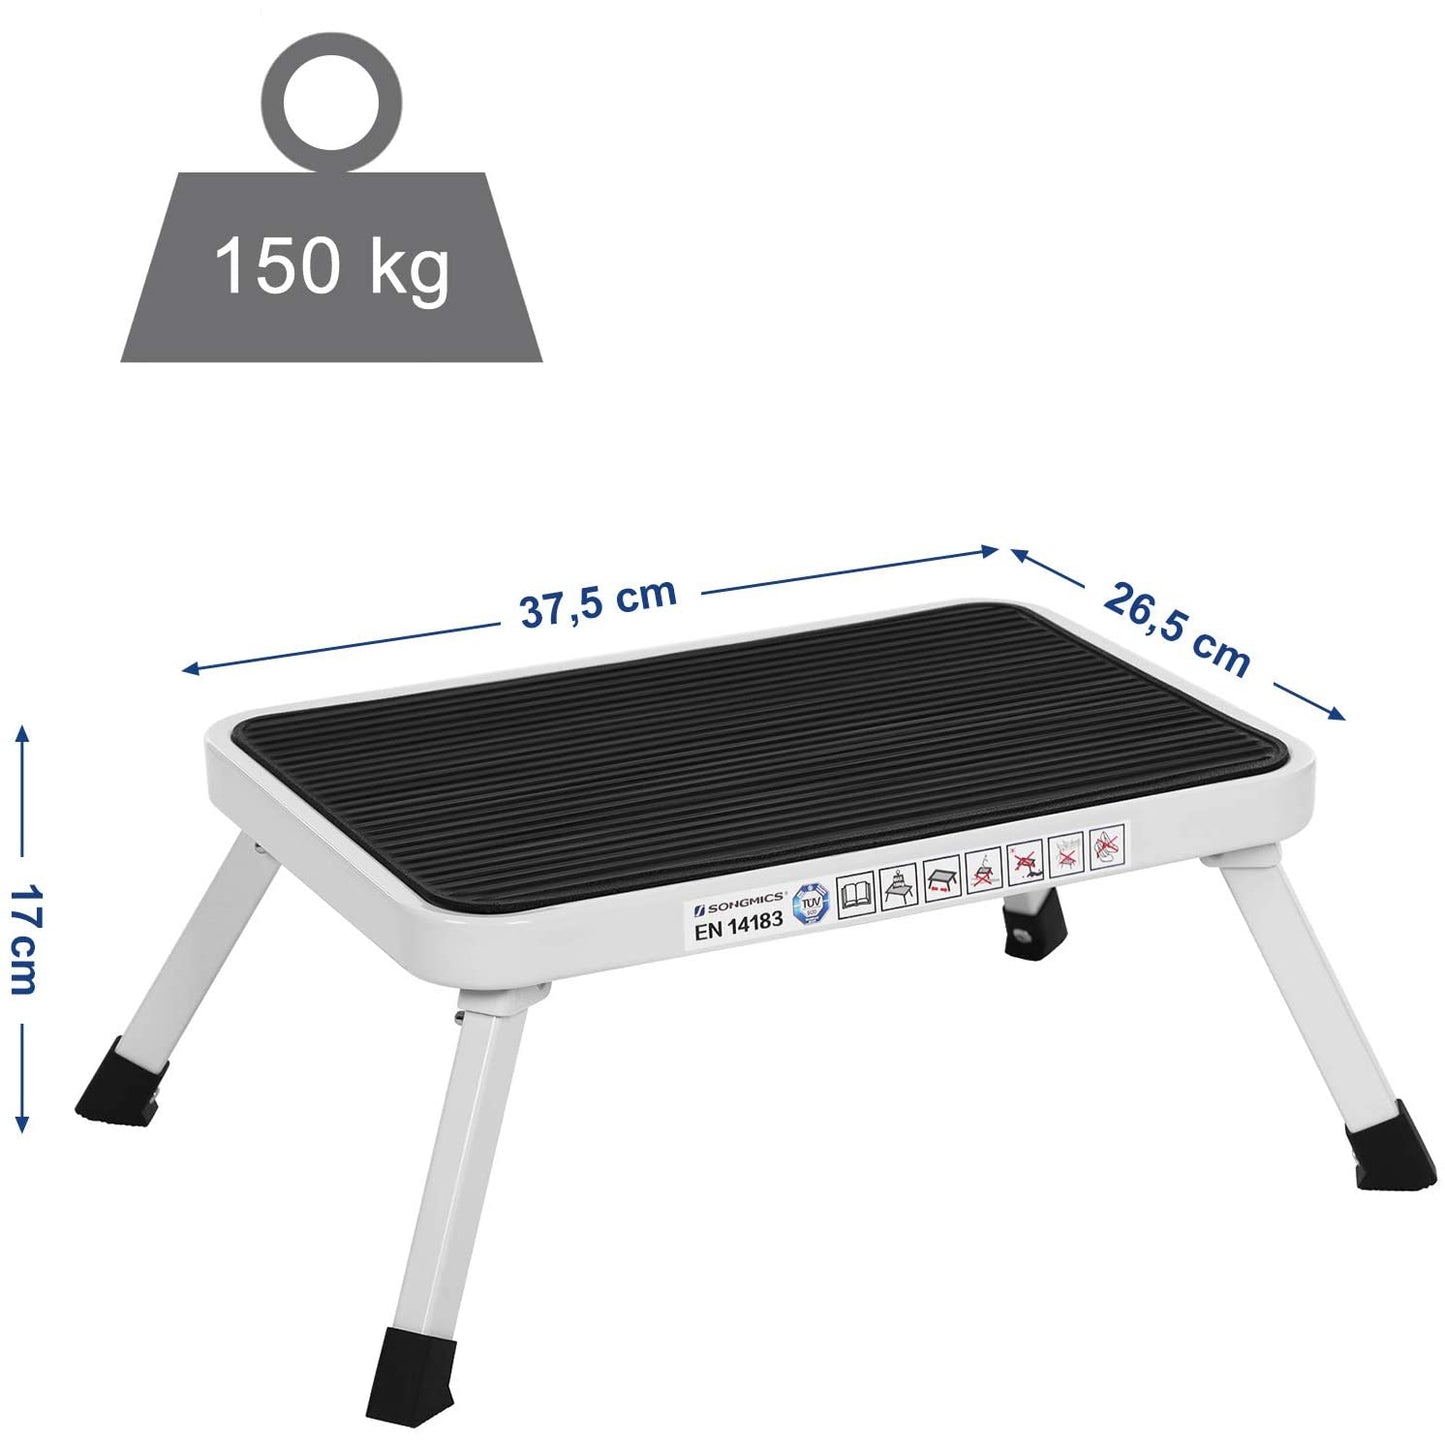 Nancy's Barre Step Stool - Collapsible - Anti-Slip - Compact - Small - Stool - Camping Stool - TÜV Süd-Certified - Black-White - 37.5 x 4 x 26.5 cm